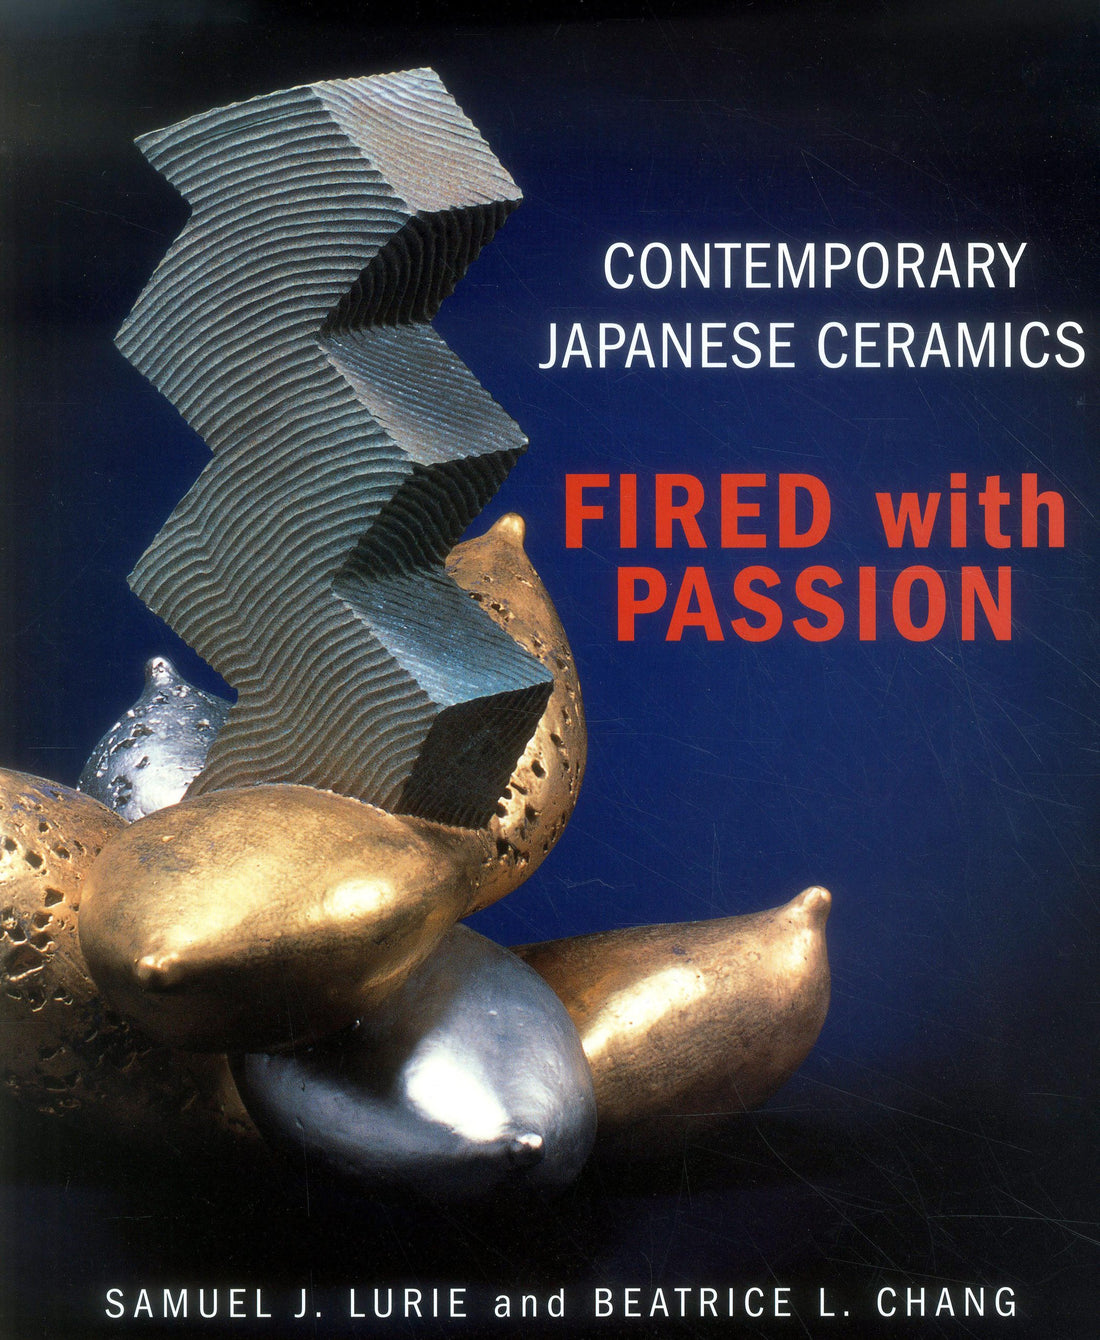 Contemporary Japanese Ceramics: Fired with Passion